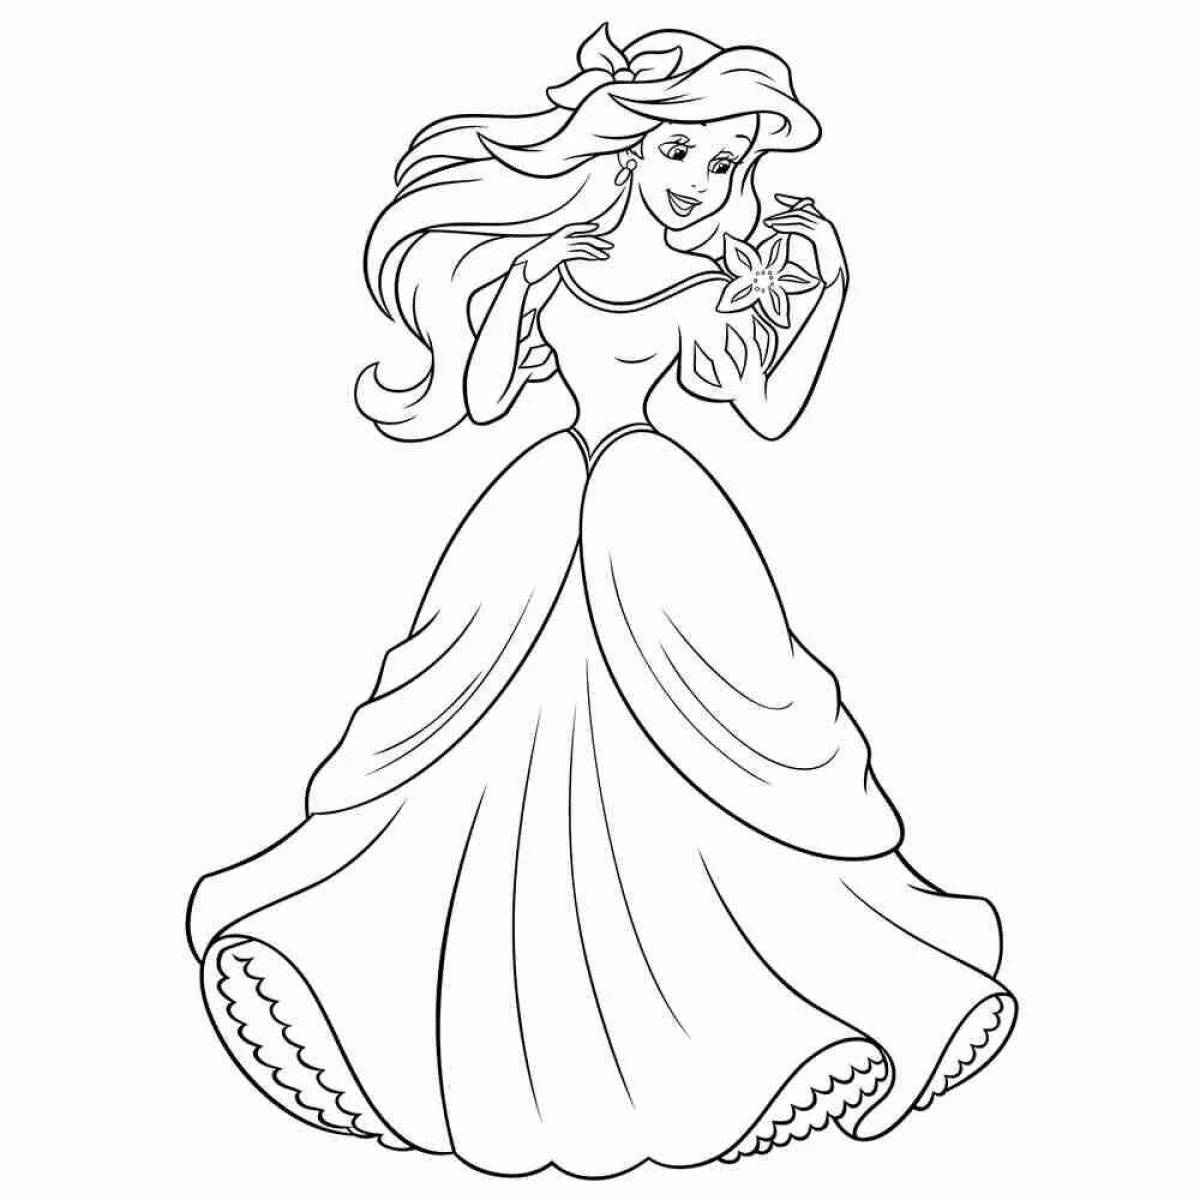 Exalted coloring page включите принцесс